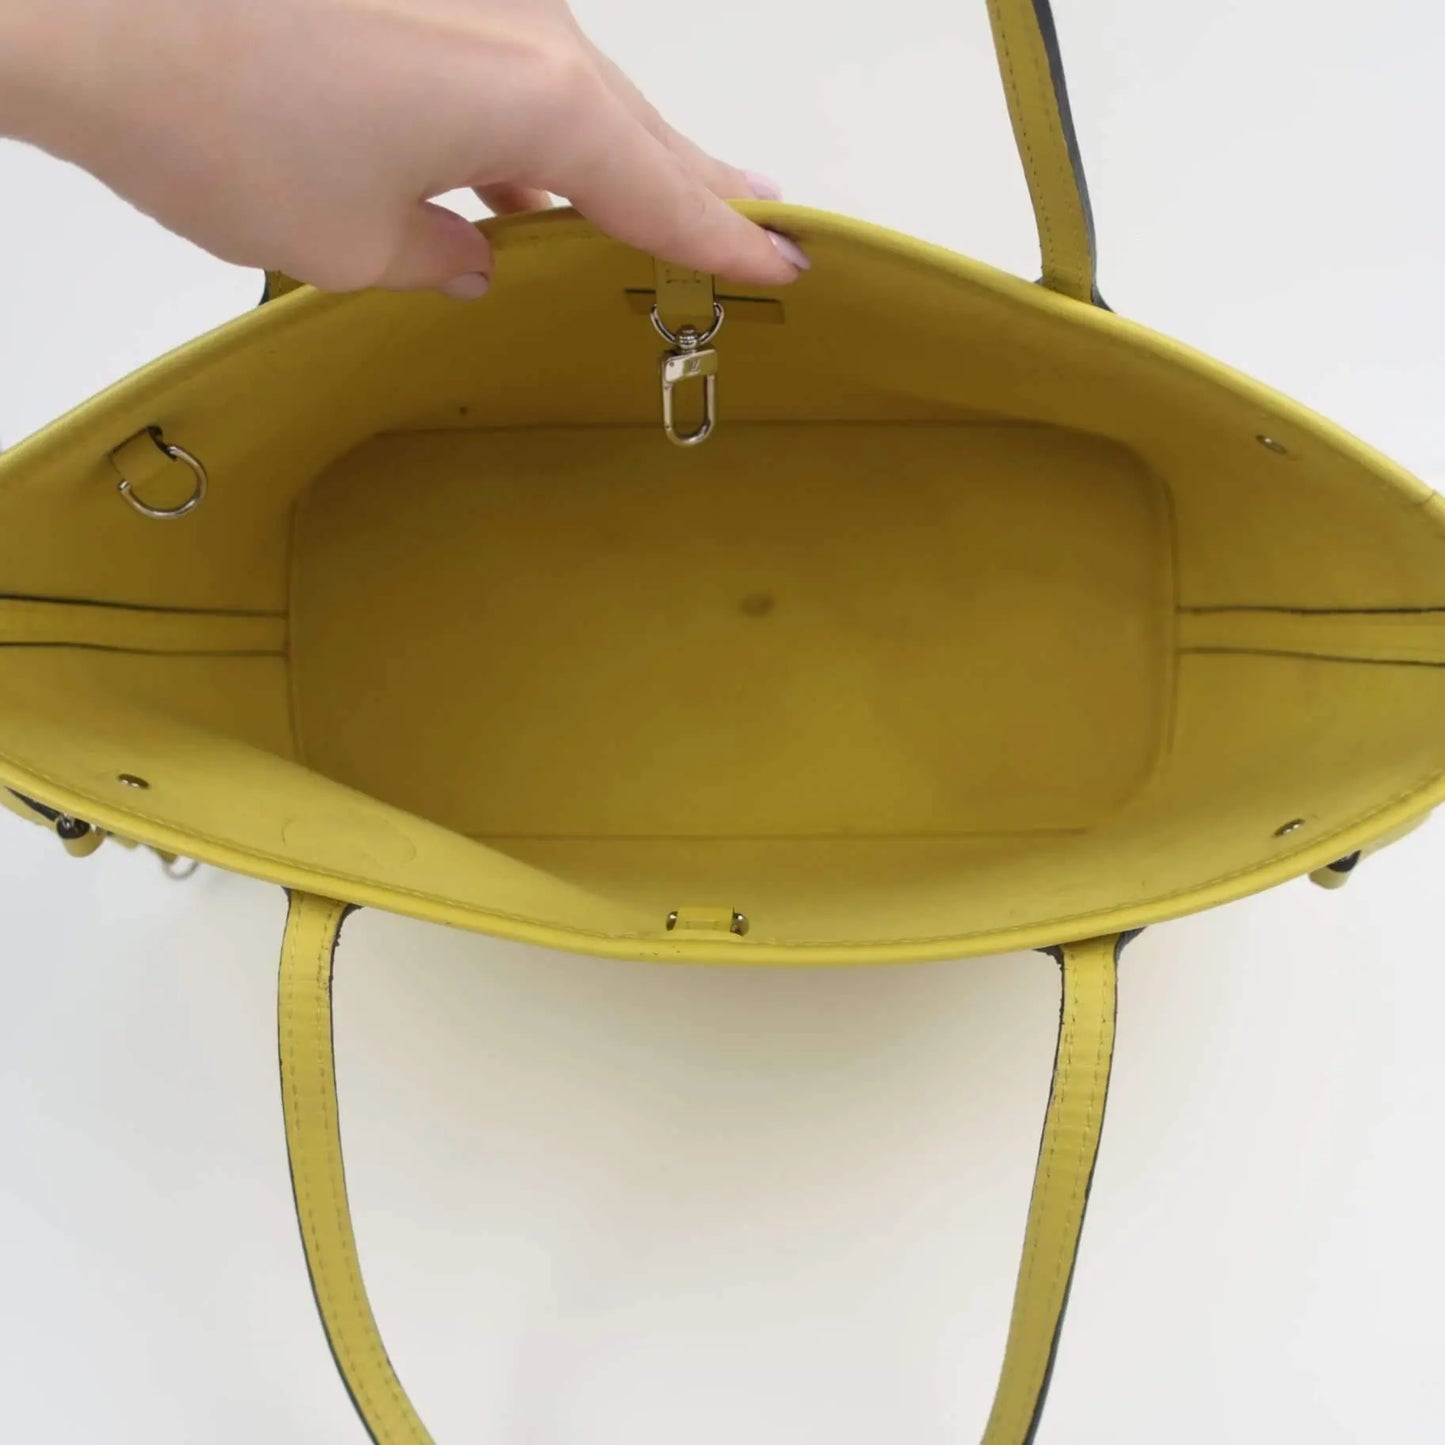 Load image into Gallery viewer, Louis Vuitton Louis Vuitton Neverfull PM Yellow Epi with Pouch LVBagaholic
